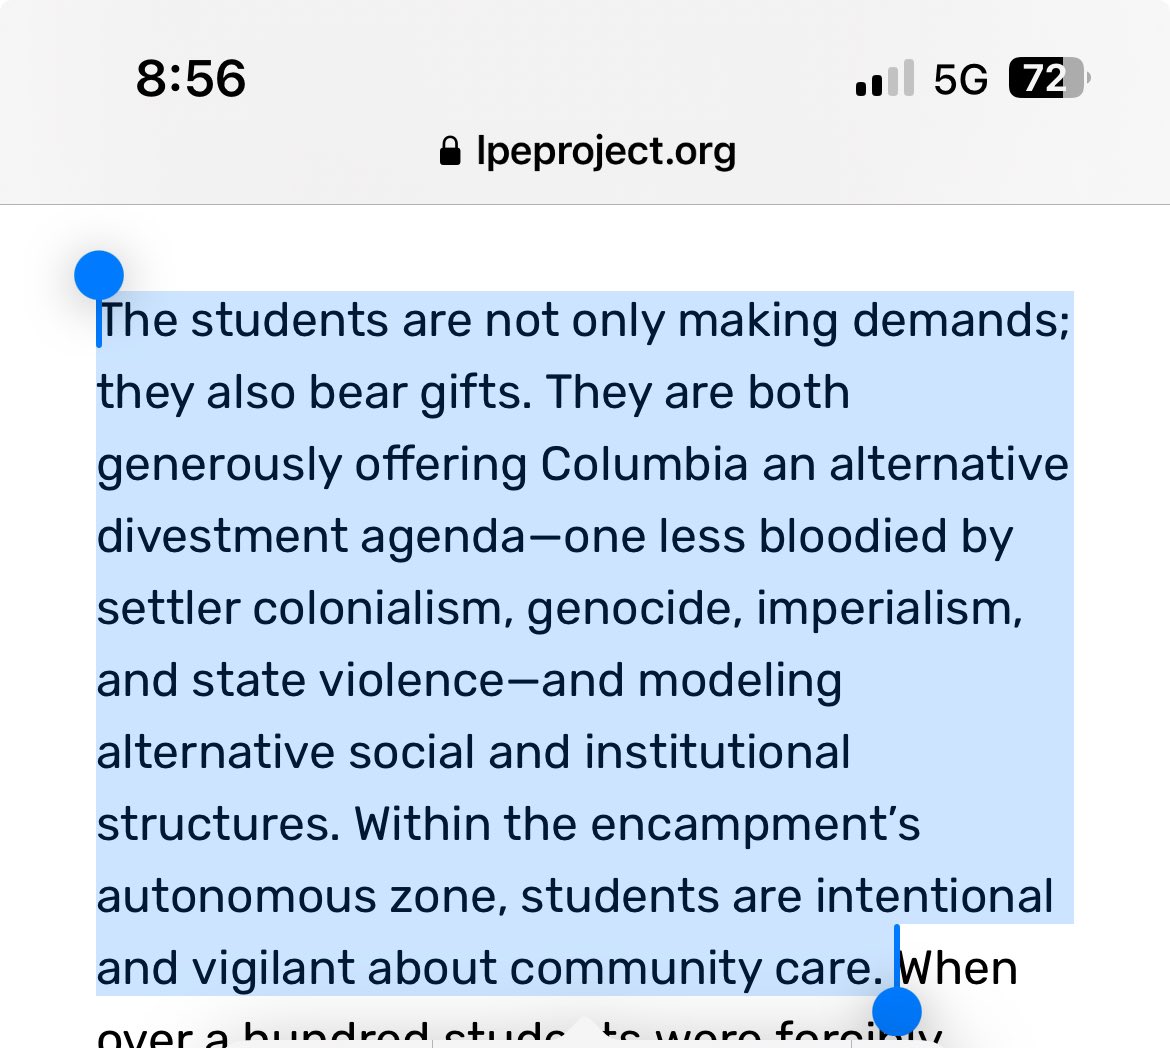 This is my favorite part of these brilliant reflections on the @LPEblog, written by students at the encampments. “The students are not only making demands, they also bear gifts.” Gifts that help us envision a different, less bloodied future.